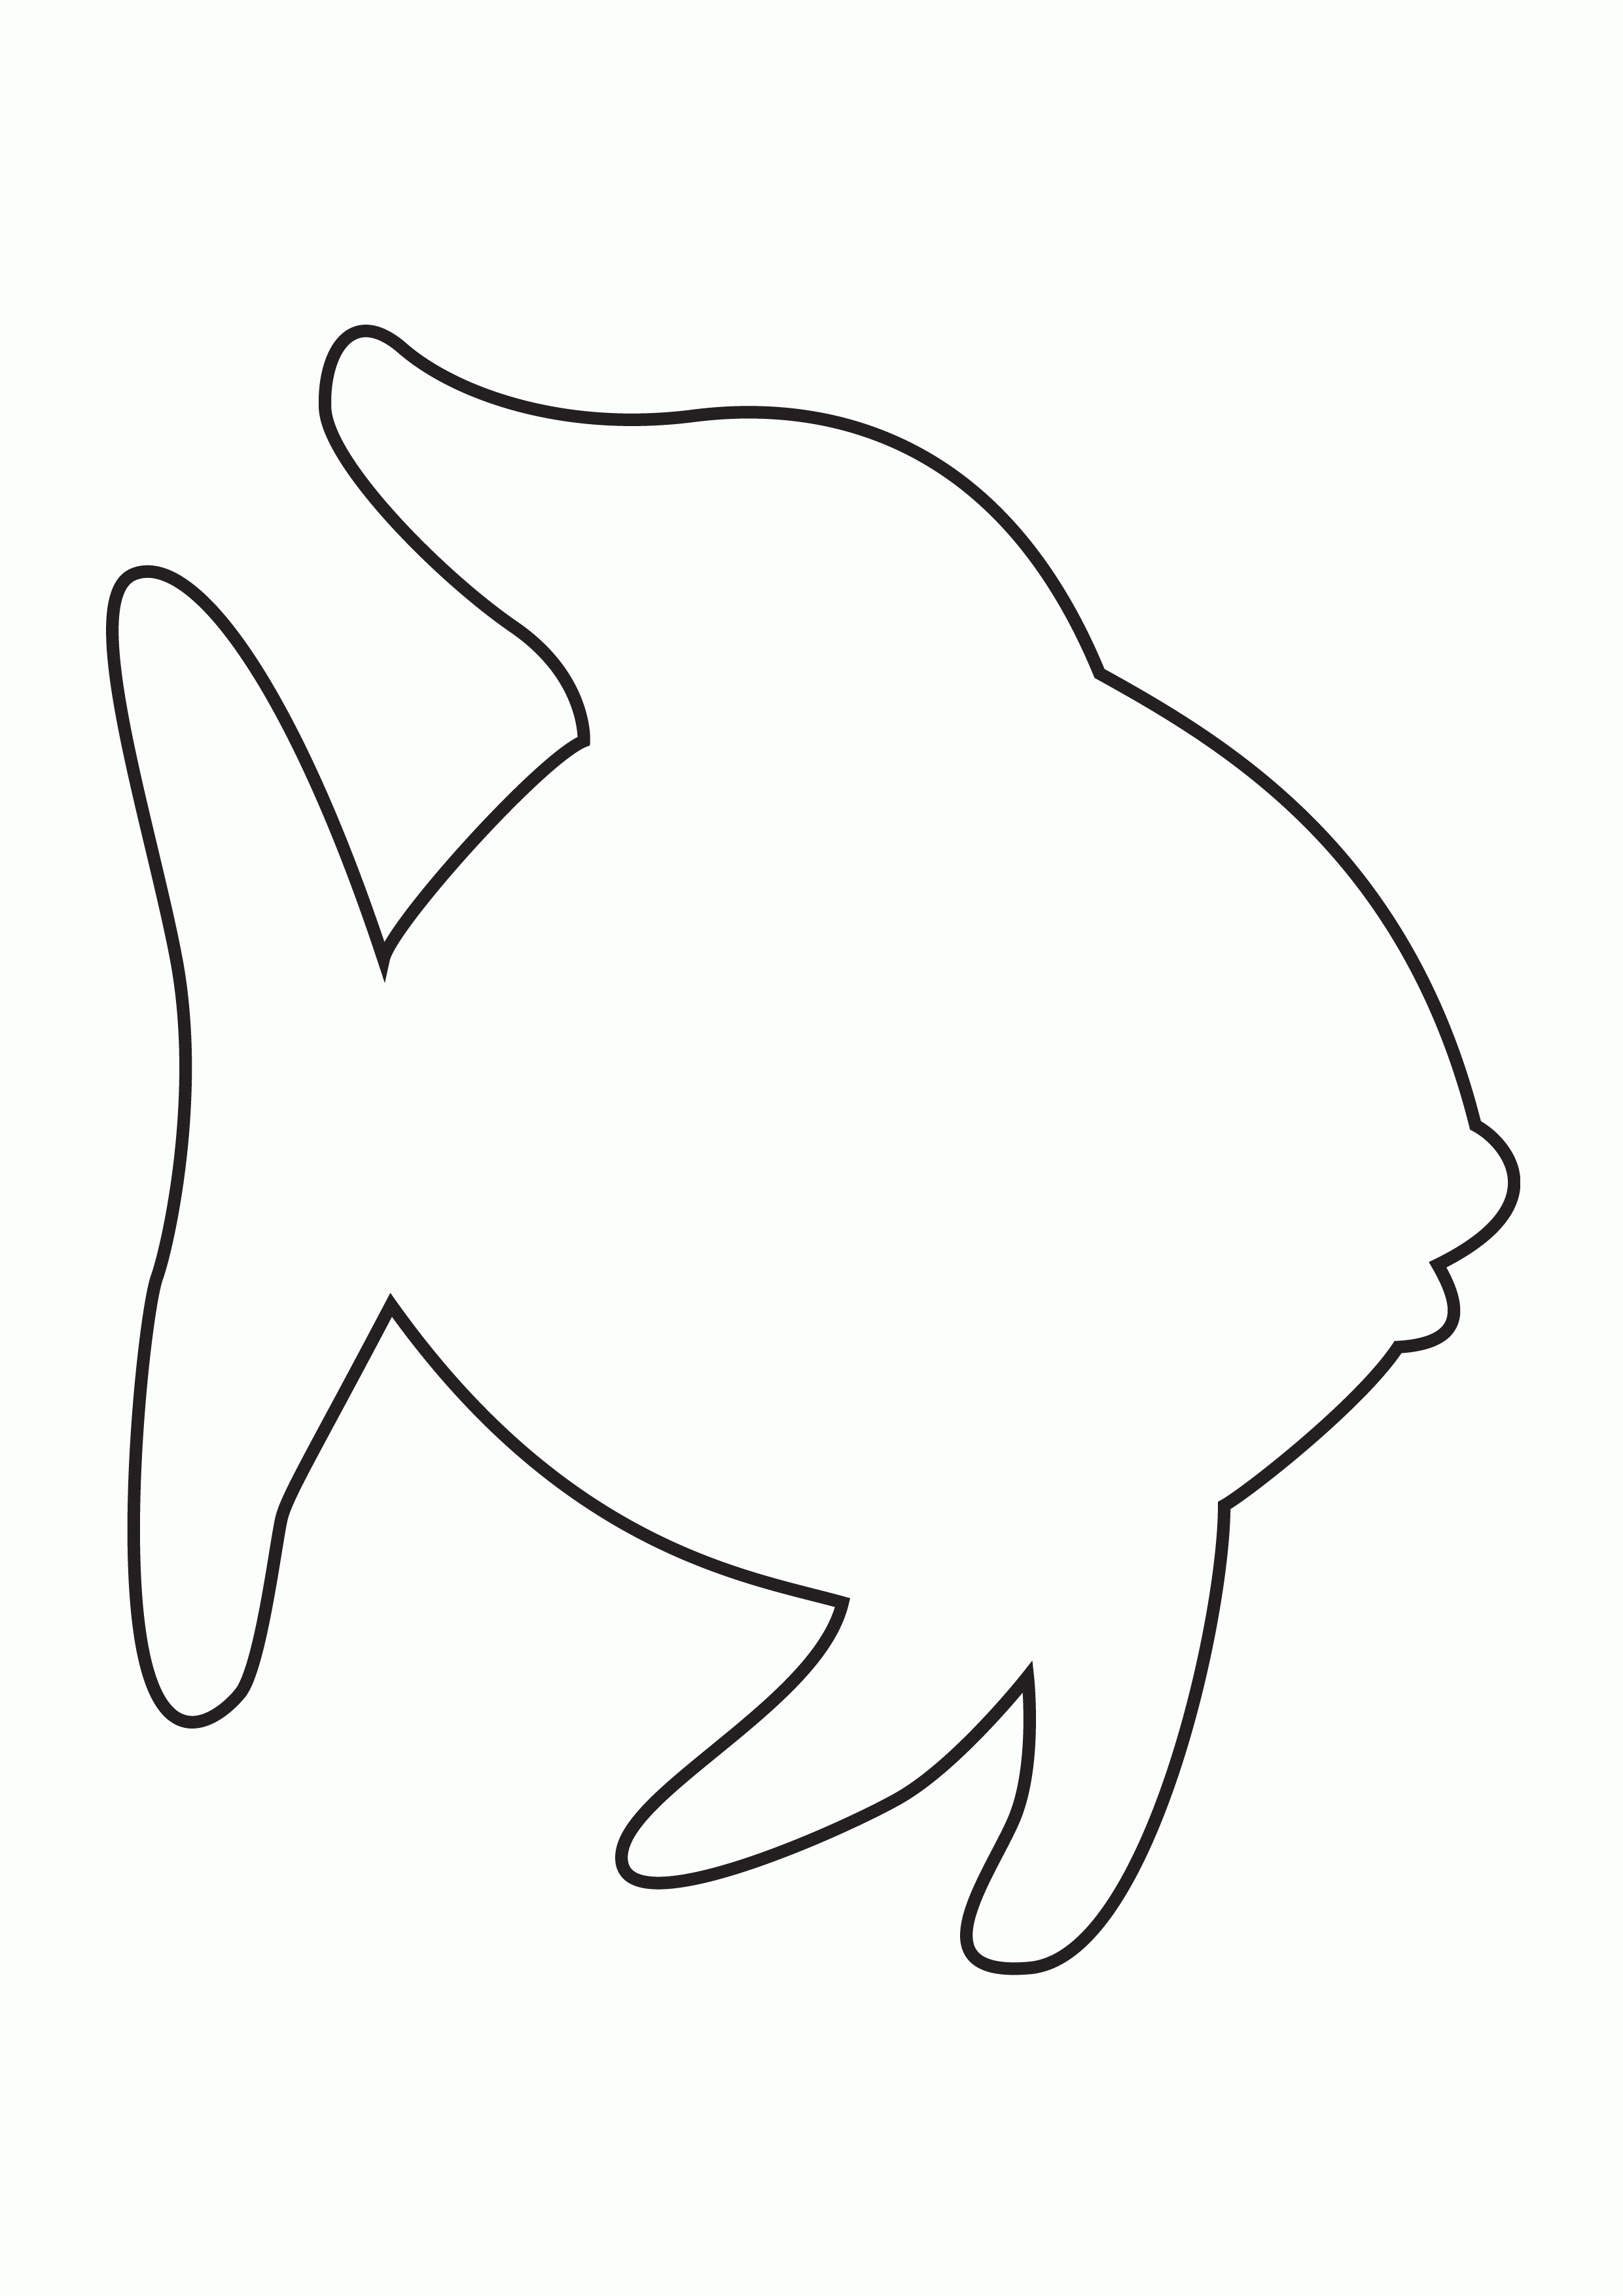 fisch outline coloring page